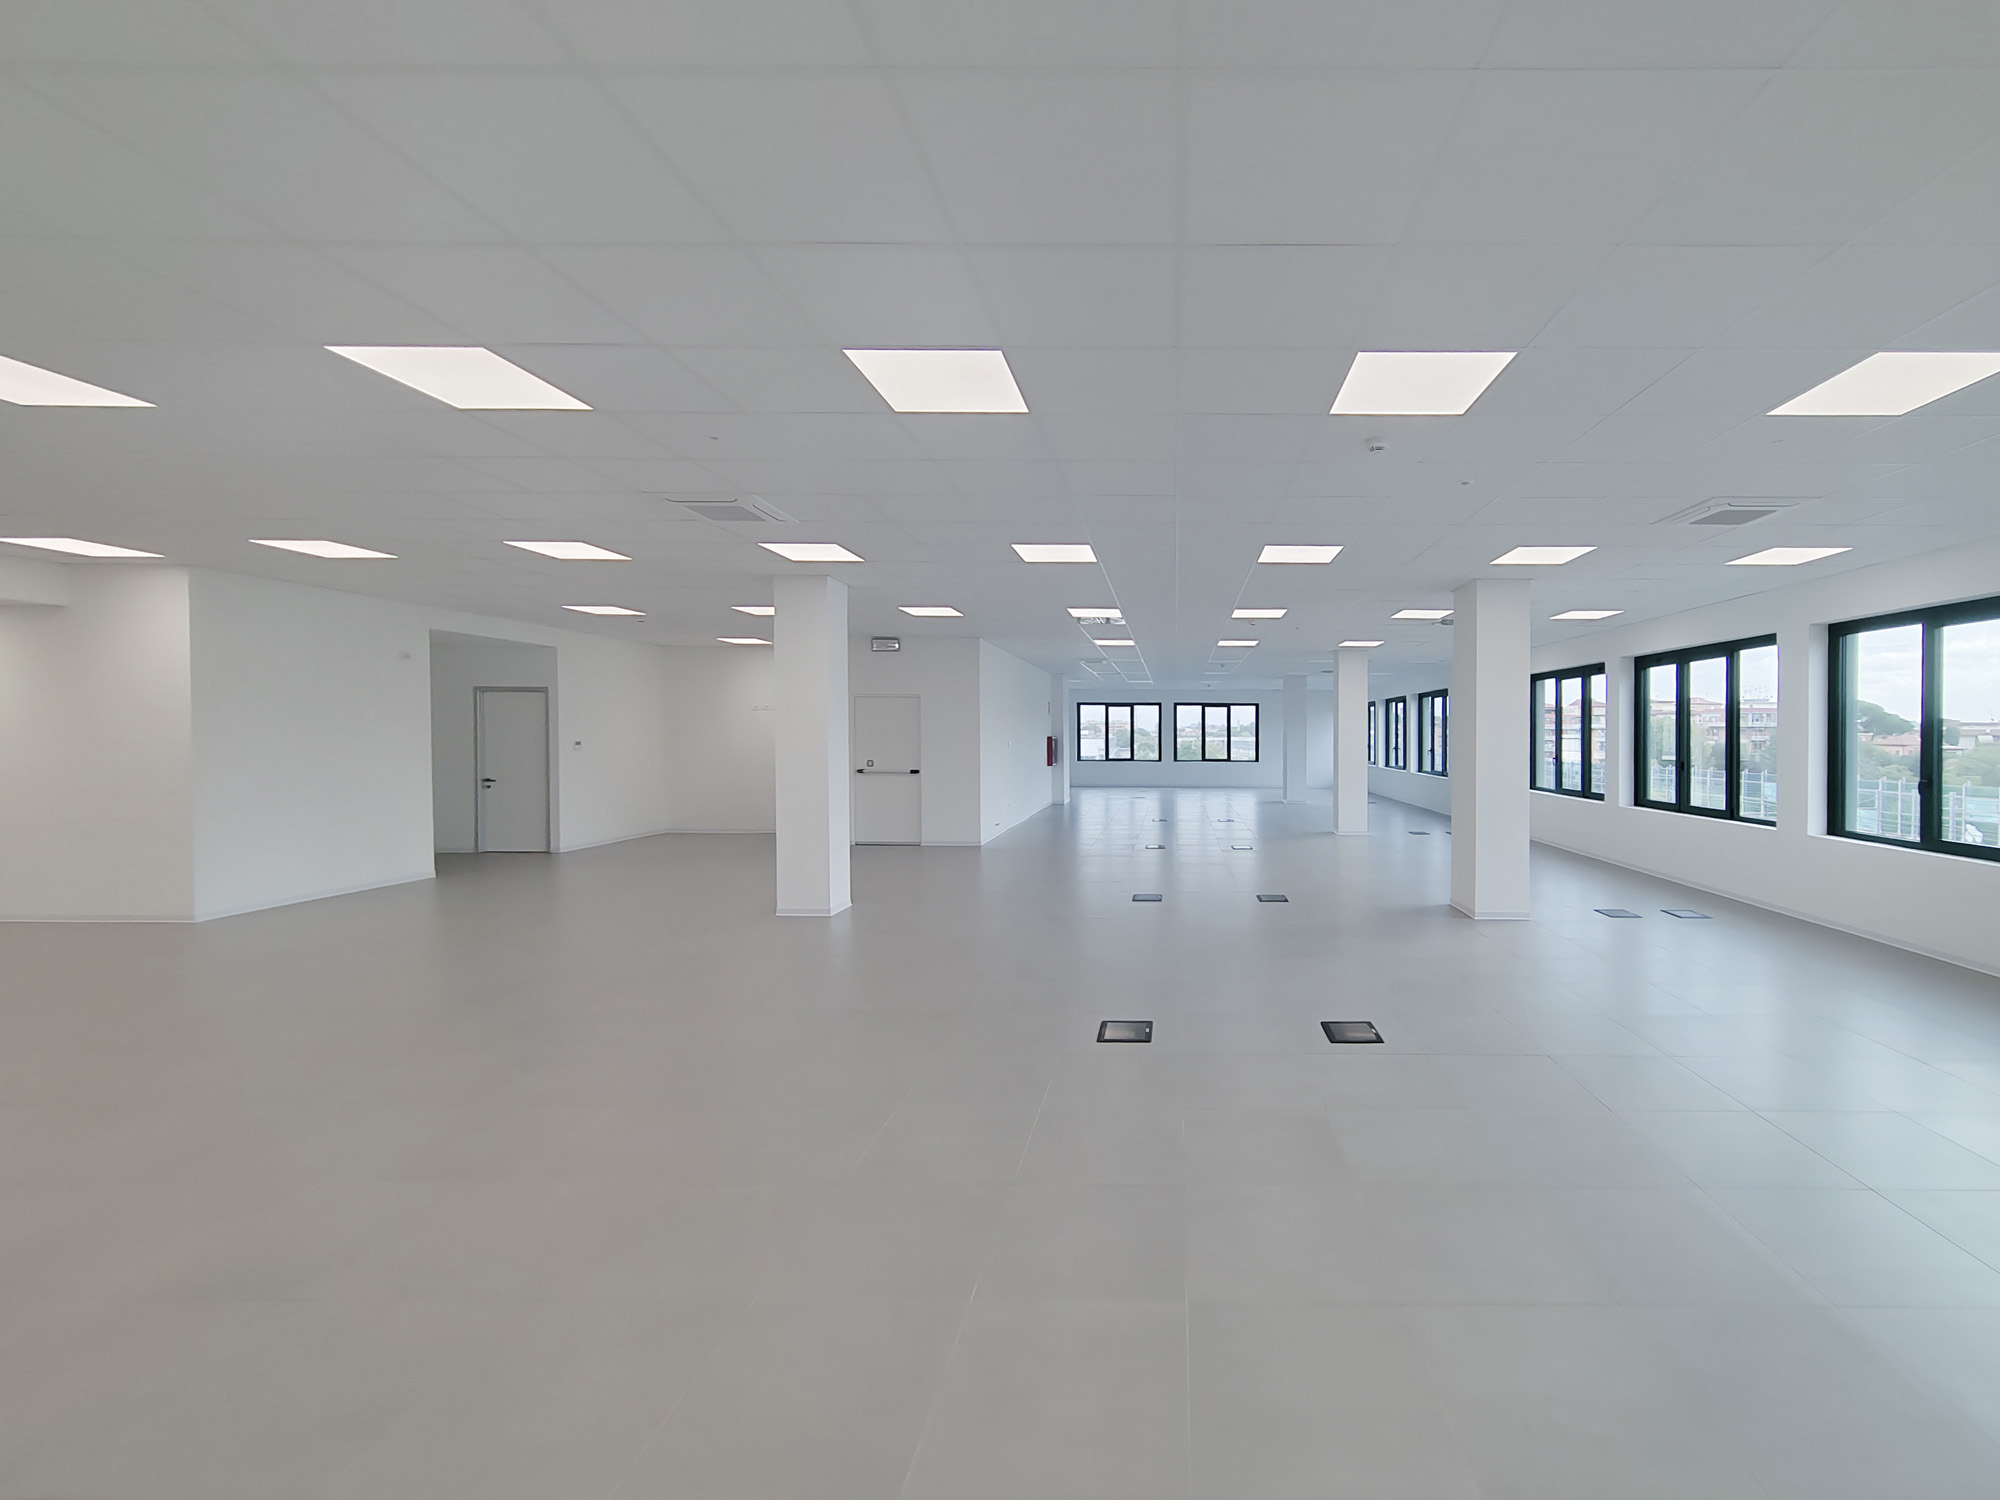 Image of the interior of the offices at the Il Molino di Tor Cervara logistics hub in Rome